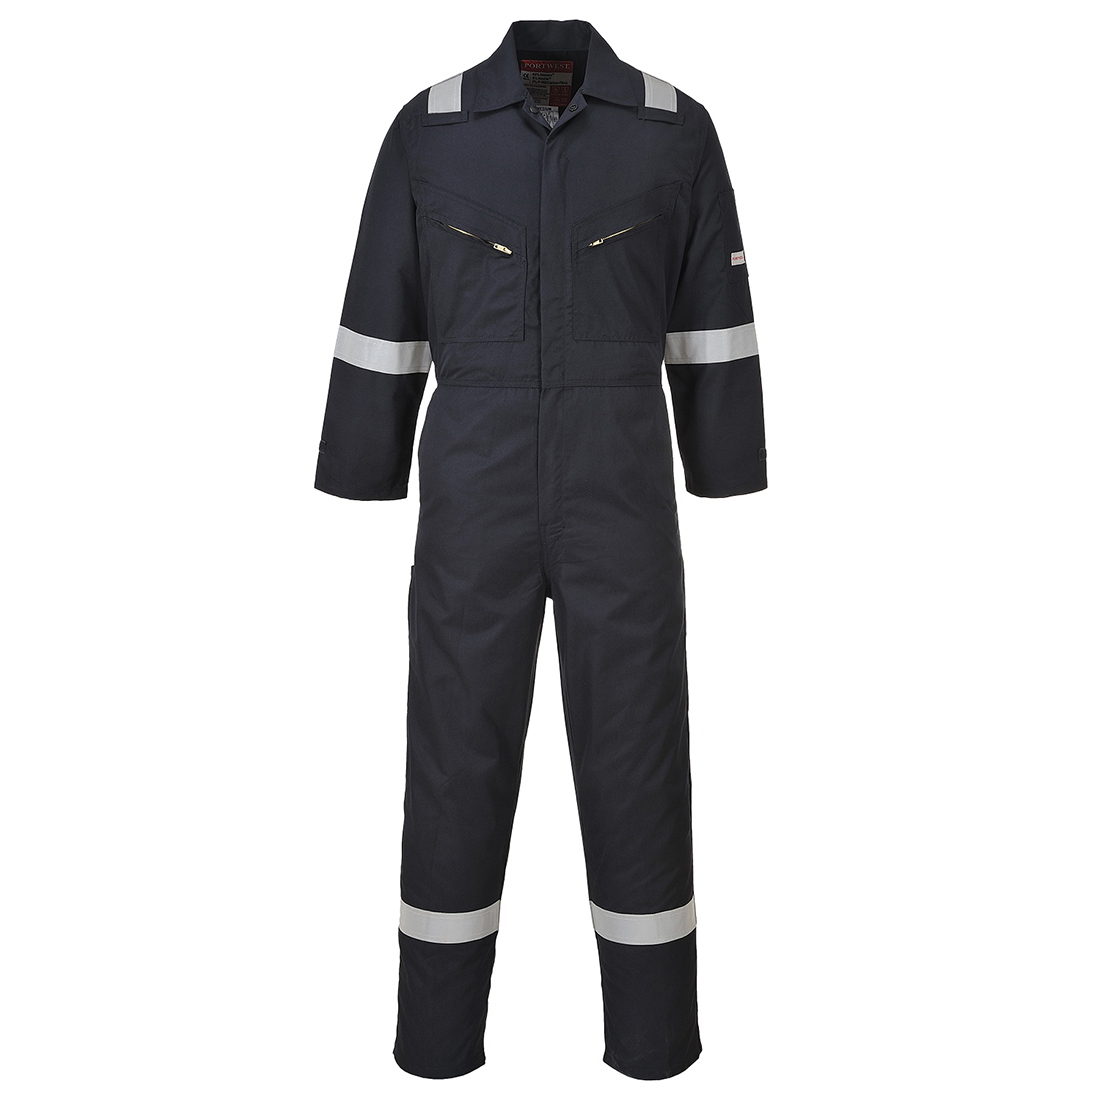 Durable Comfort Flame Resistant Work Coverall made from Nomex